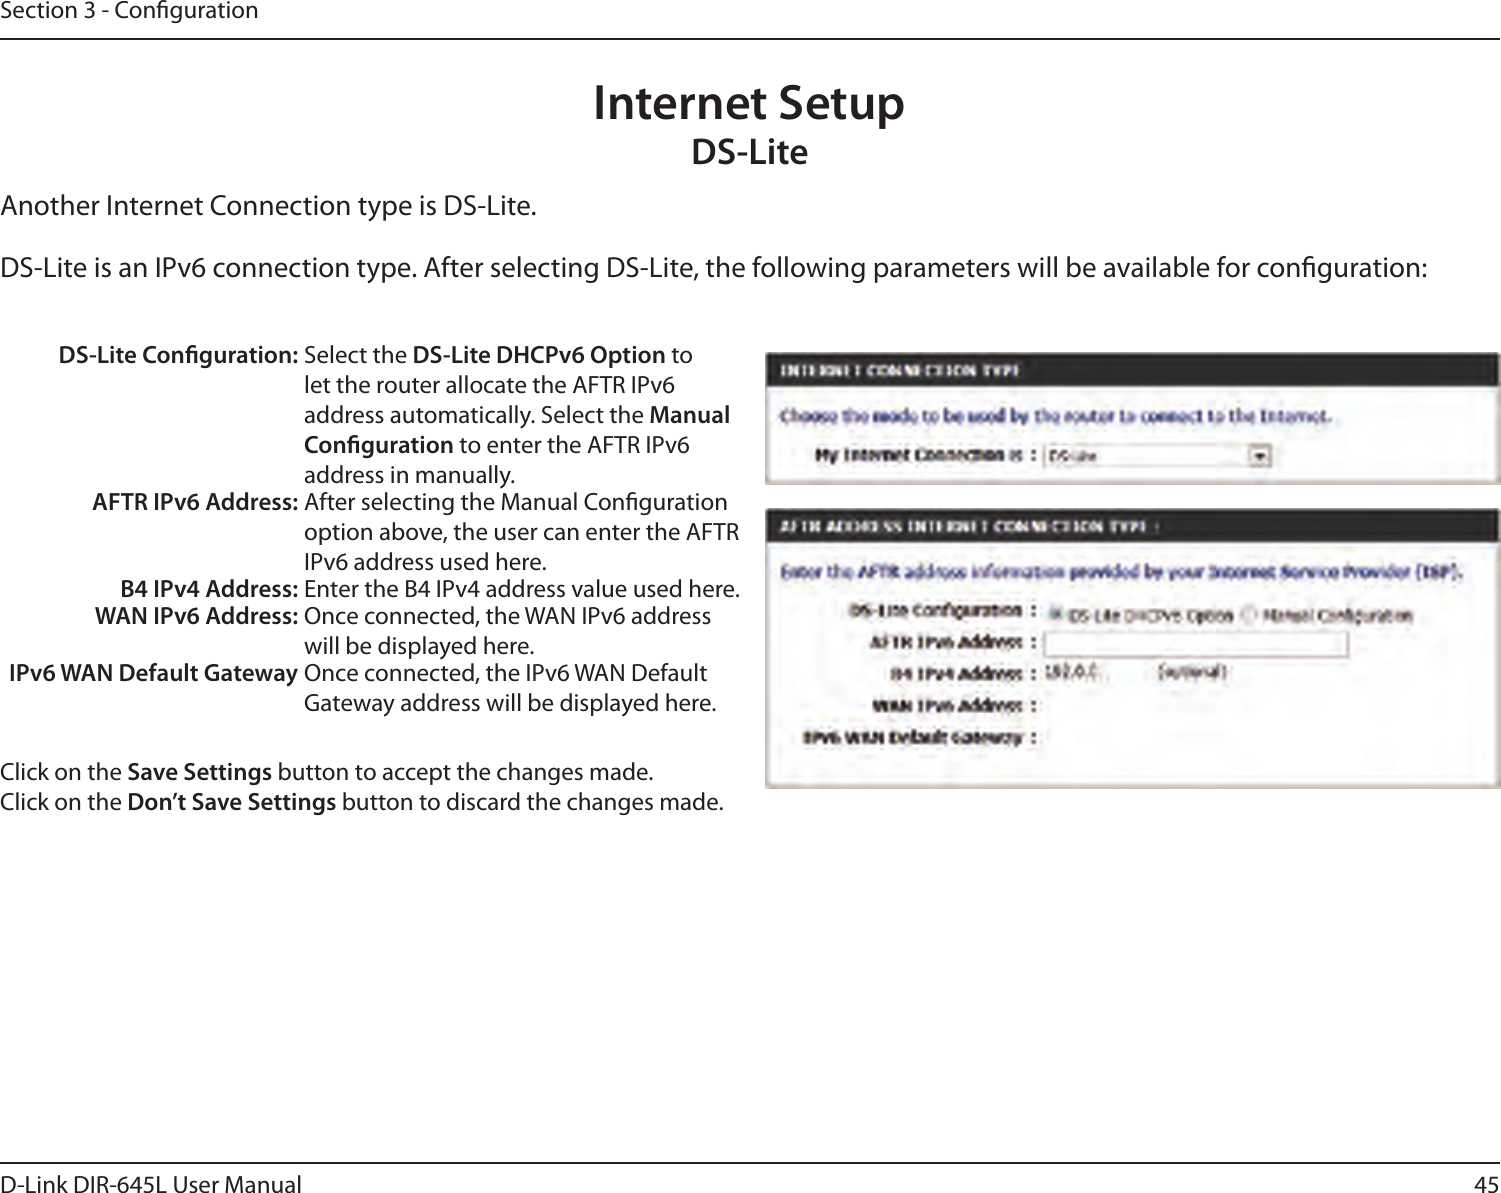 45D-Link DIR-645L User ManualSection 3 - CongurationInternet SetupDS-LiteAnother Internet Connection type is DS-Lite.DS-Lite is an IPv6 connection type. After selecting DS-Lite, the following parameters will be available for conguration:DS-Lite Conguration: Select the DS-Lite DHCPv6 Option to let the router allocate the AFTR IPv6 address automatically. Select the Manual Conguration to enter the AFTR IPv6 address in manually.AFTR IPv6 Address: After selecting the Manual Conguration option above, the user can enter the AFTR IPv6 address used here.B4 IPv4 Address: Enter the B4 IPv4 address value used here.WAN IPv6 Address: Once connected, the WAN IPv6 address will be displayed here.IPv6 WAN Default Gateway Once connected, the IPv6 WAN Default Gateway address will be displayed here.Click on the Save Settings button to accept the changes made.Click on the Don’t Save Settings button to discard the changes made.